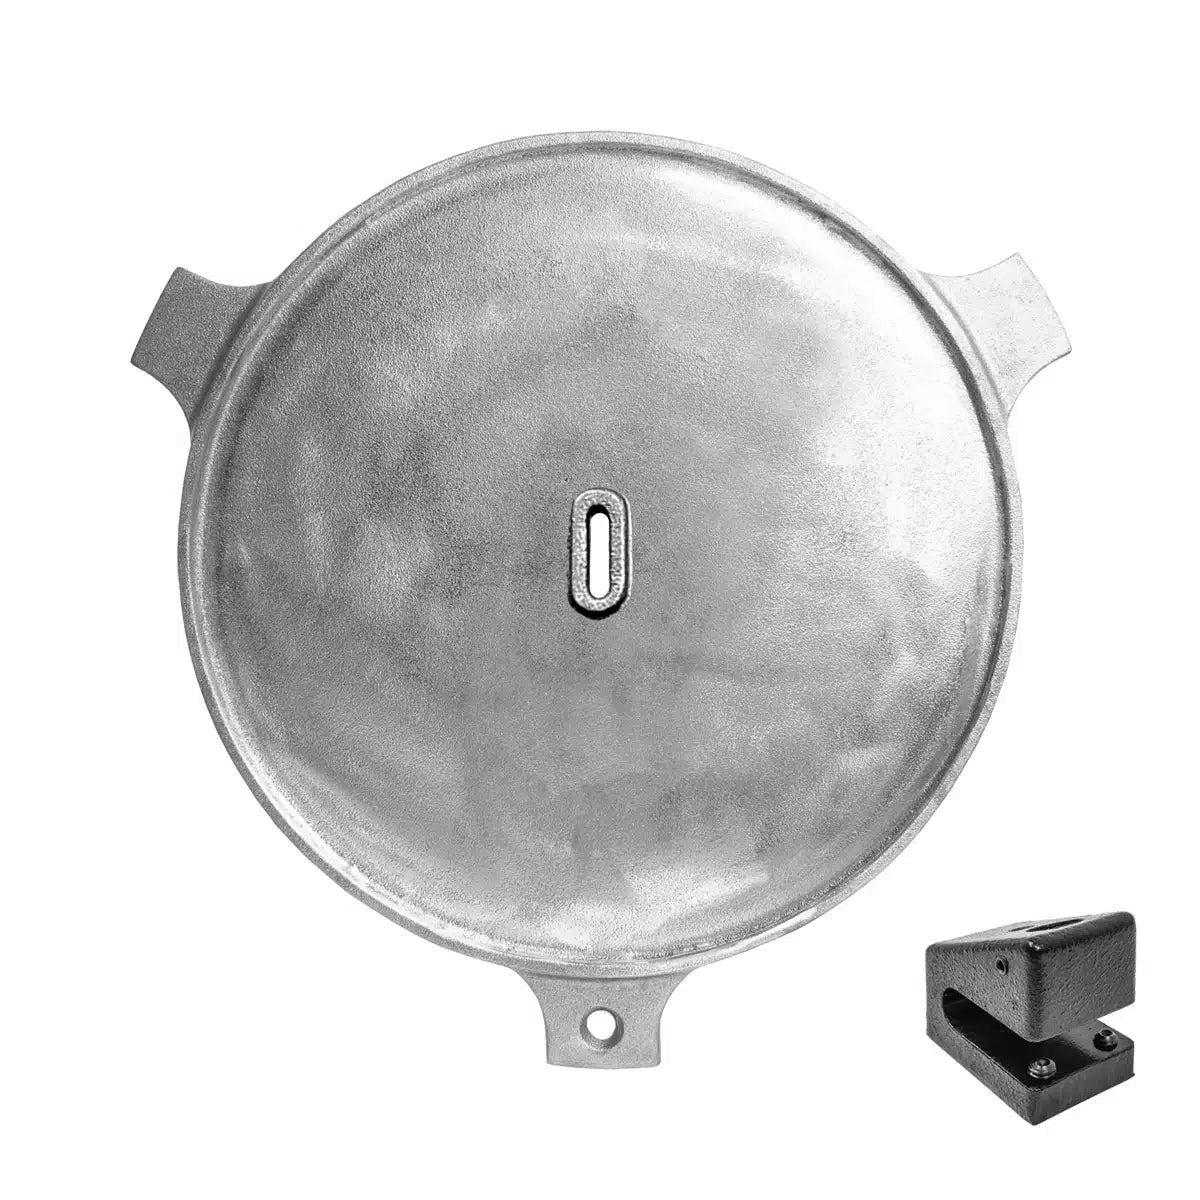 Golden's Fire Pit Cooking System Searing Plate